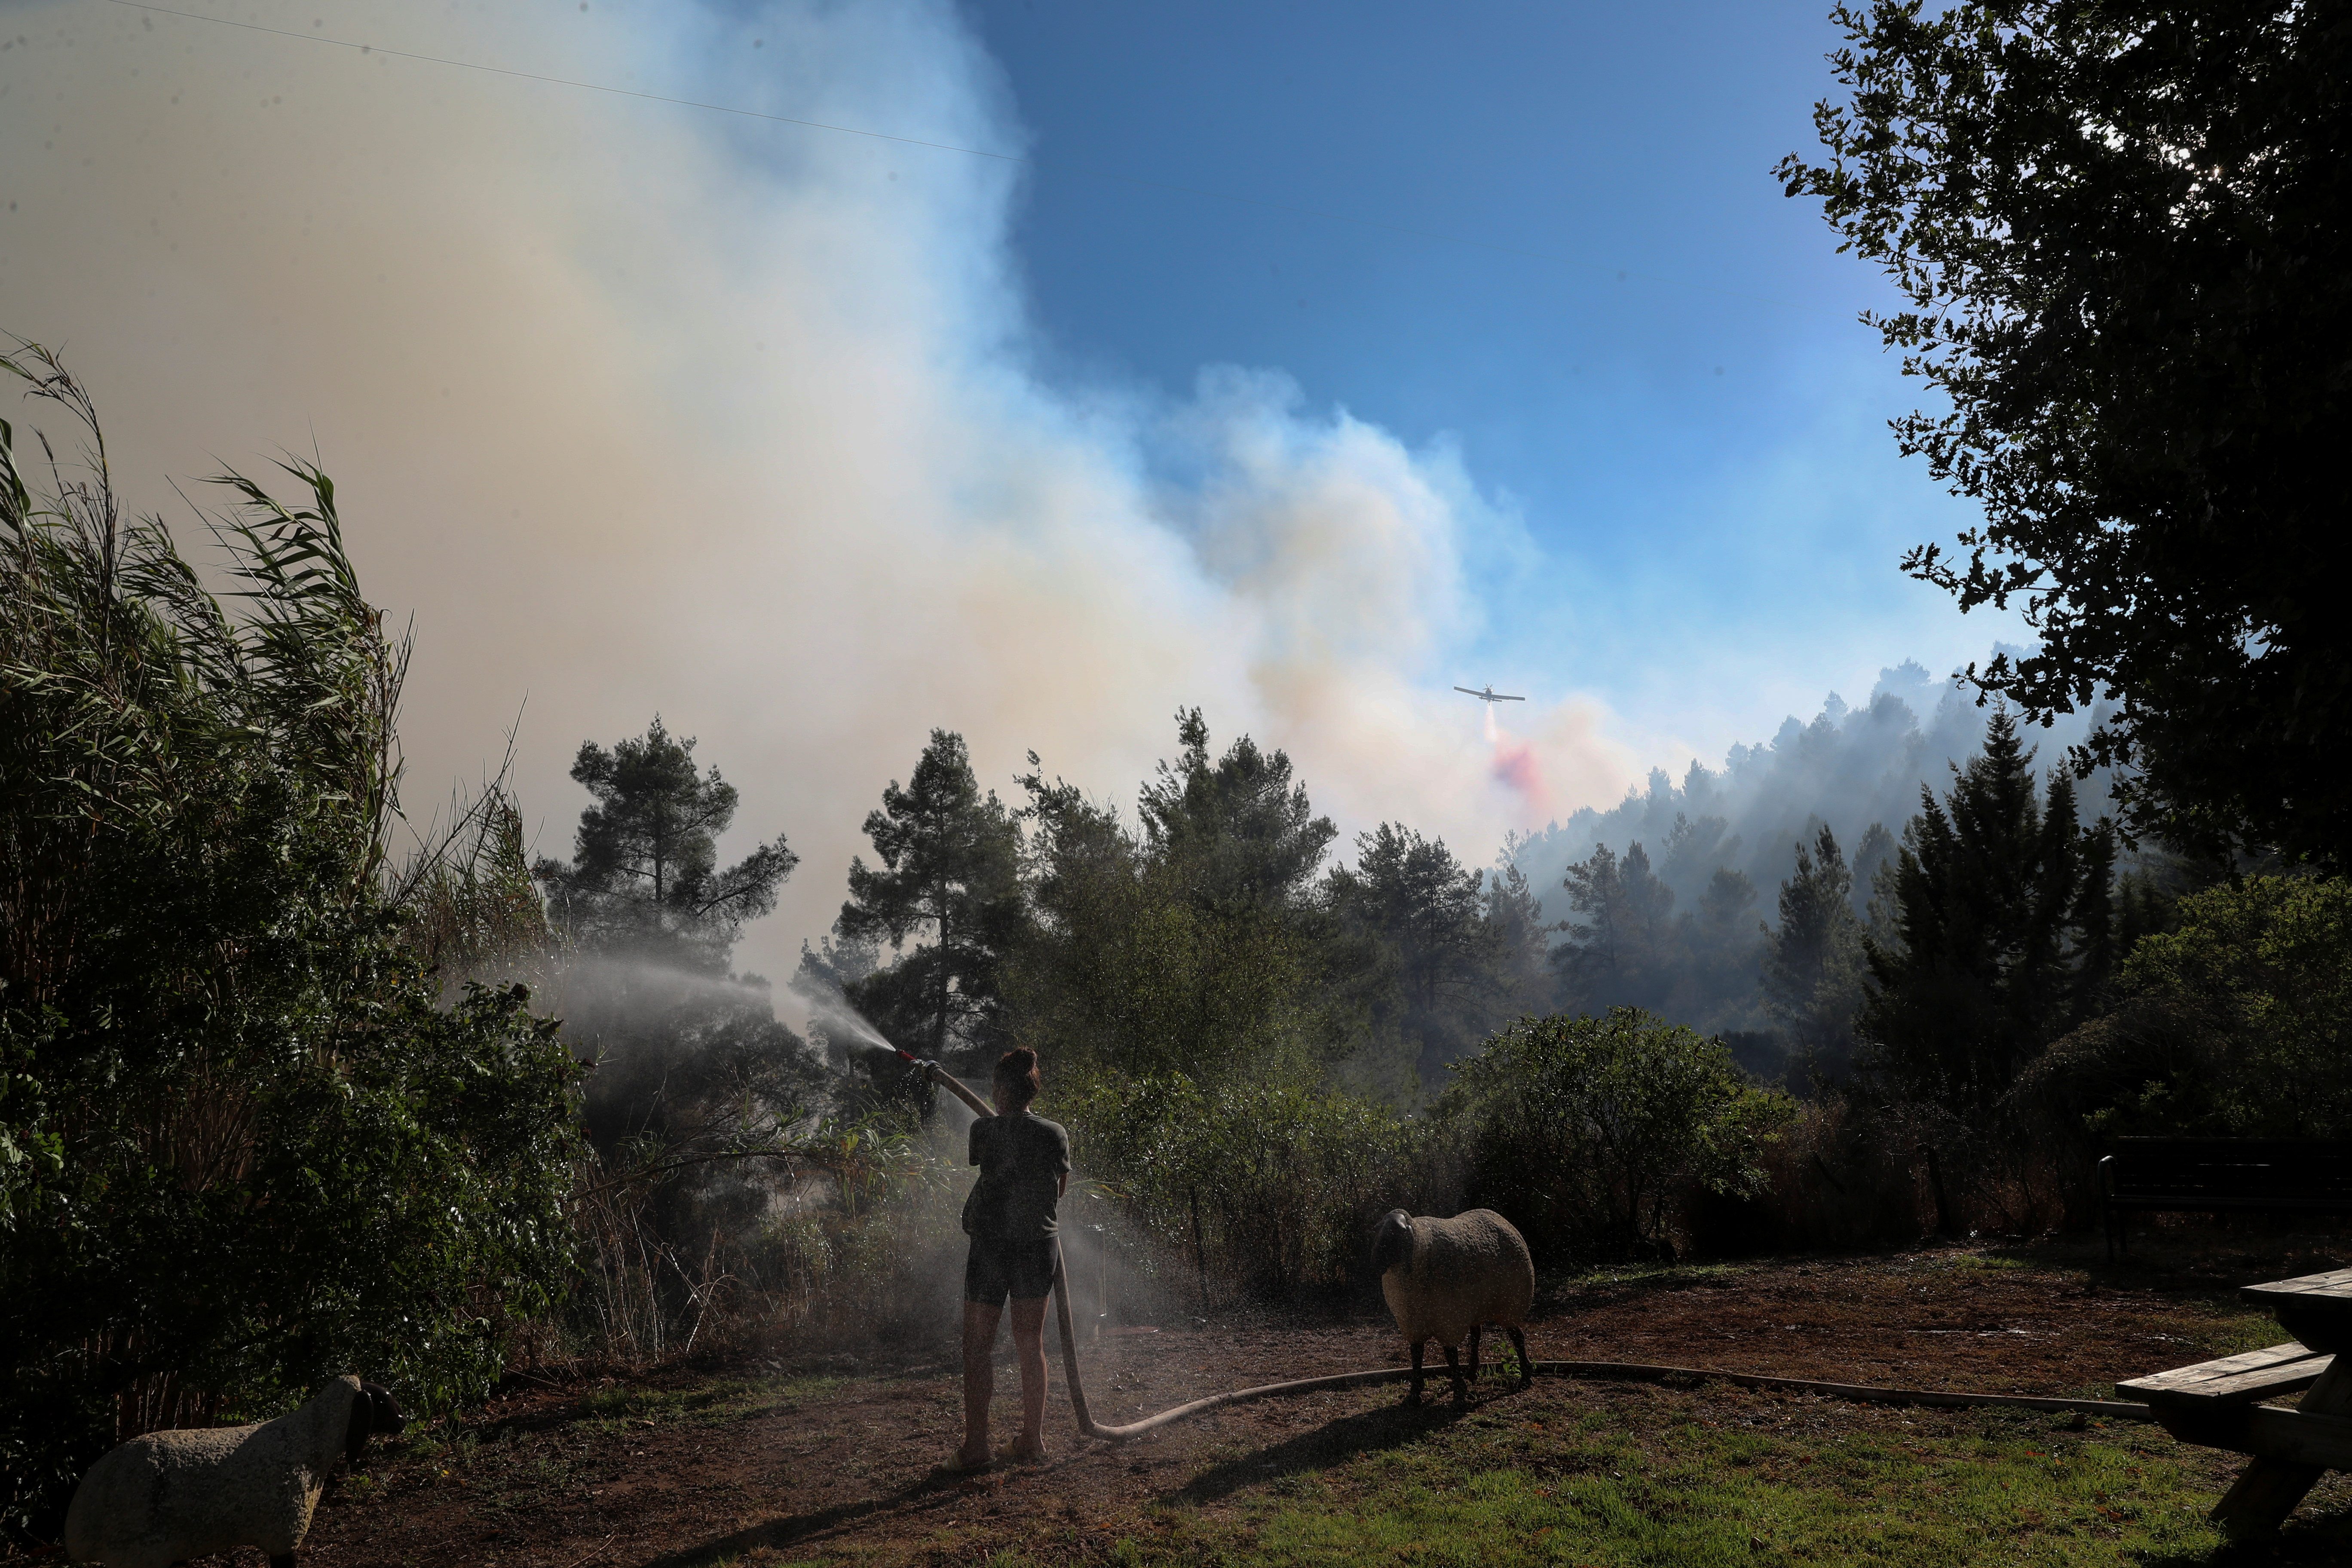 A woman sprays water at her garden as firefighting planes and firefighters try to extinguish wildfire from getting closer to the Israeli village of Shoevah at the outskirts of Jerusalem August 15, 2021. REUTERS/ Ronen Zvulun